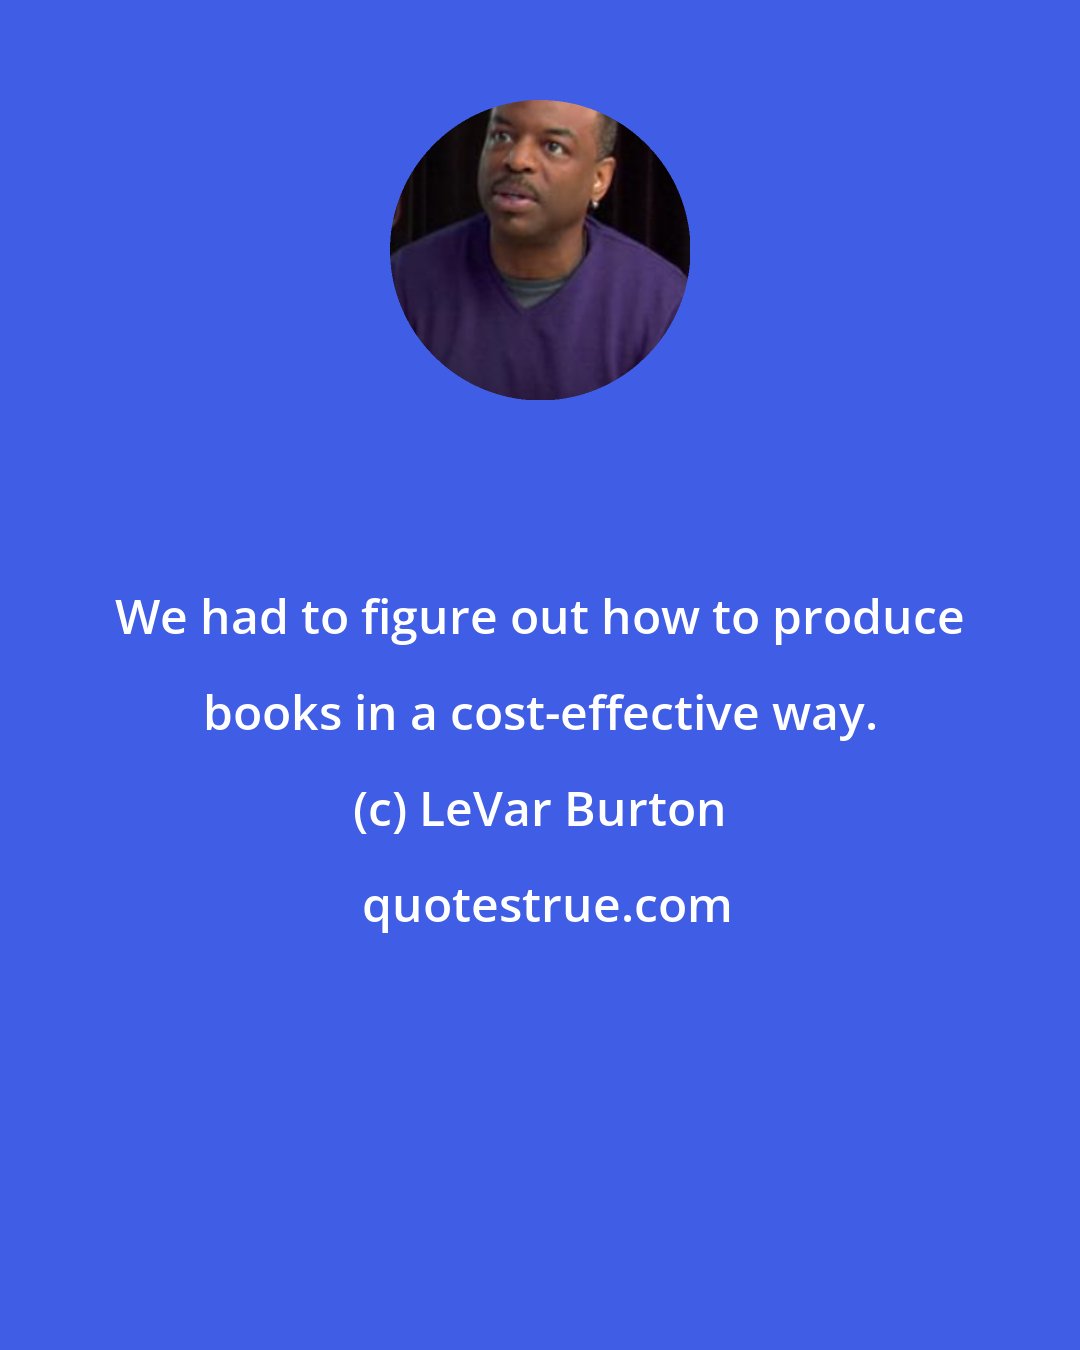 LeVar Burton: We had to figure out how to produce books in a cost-effective way.